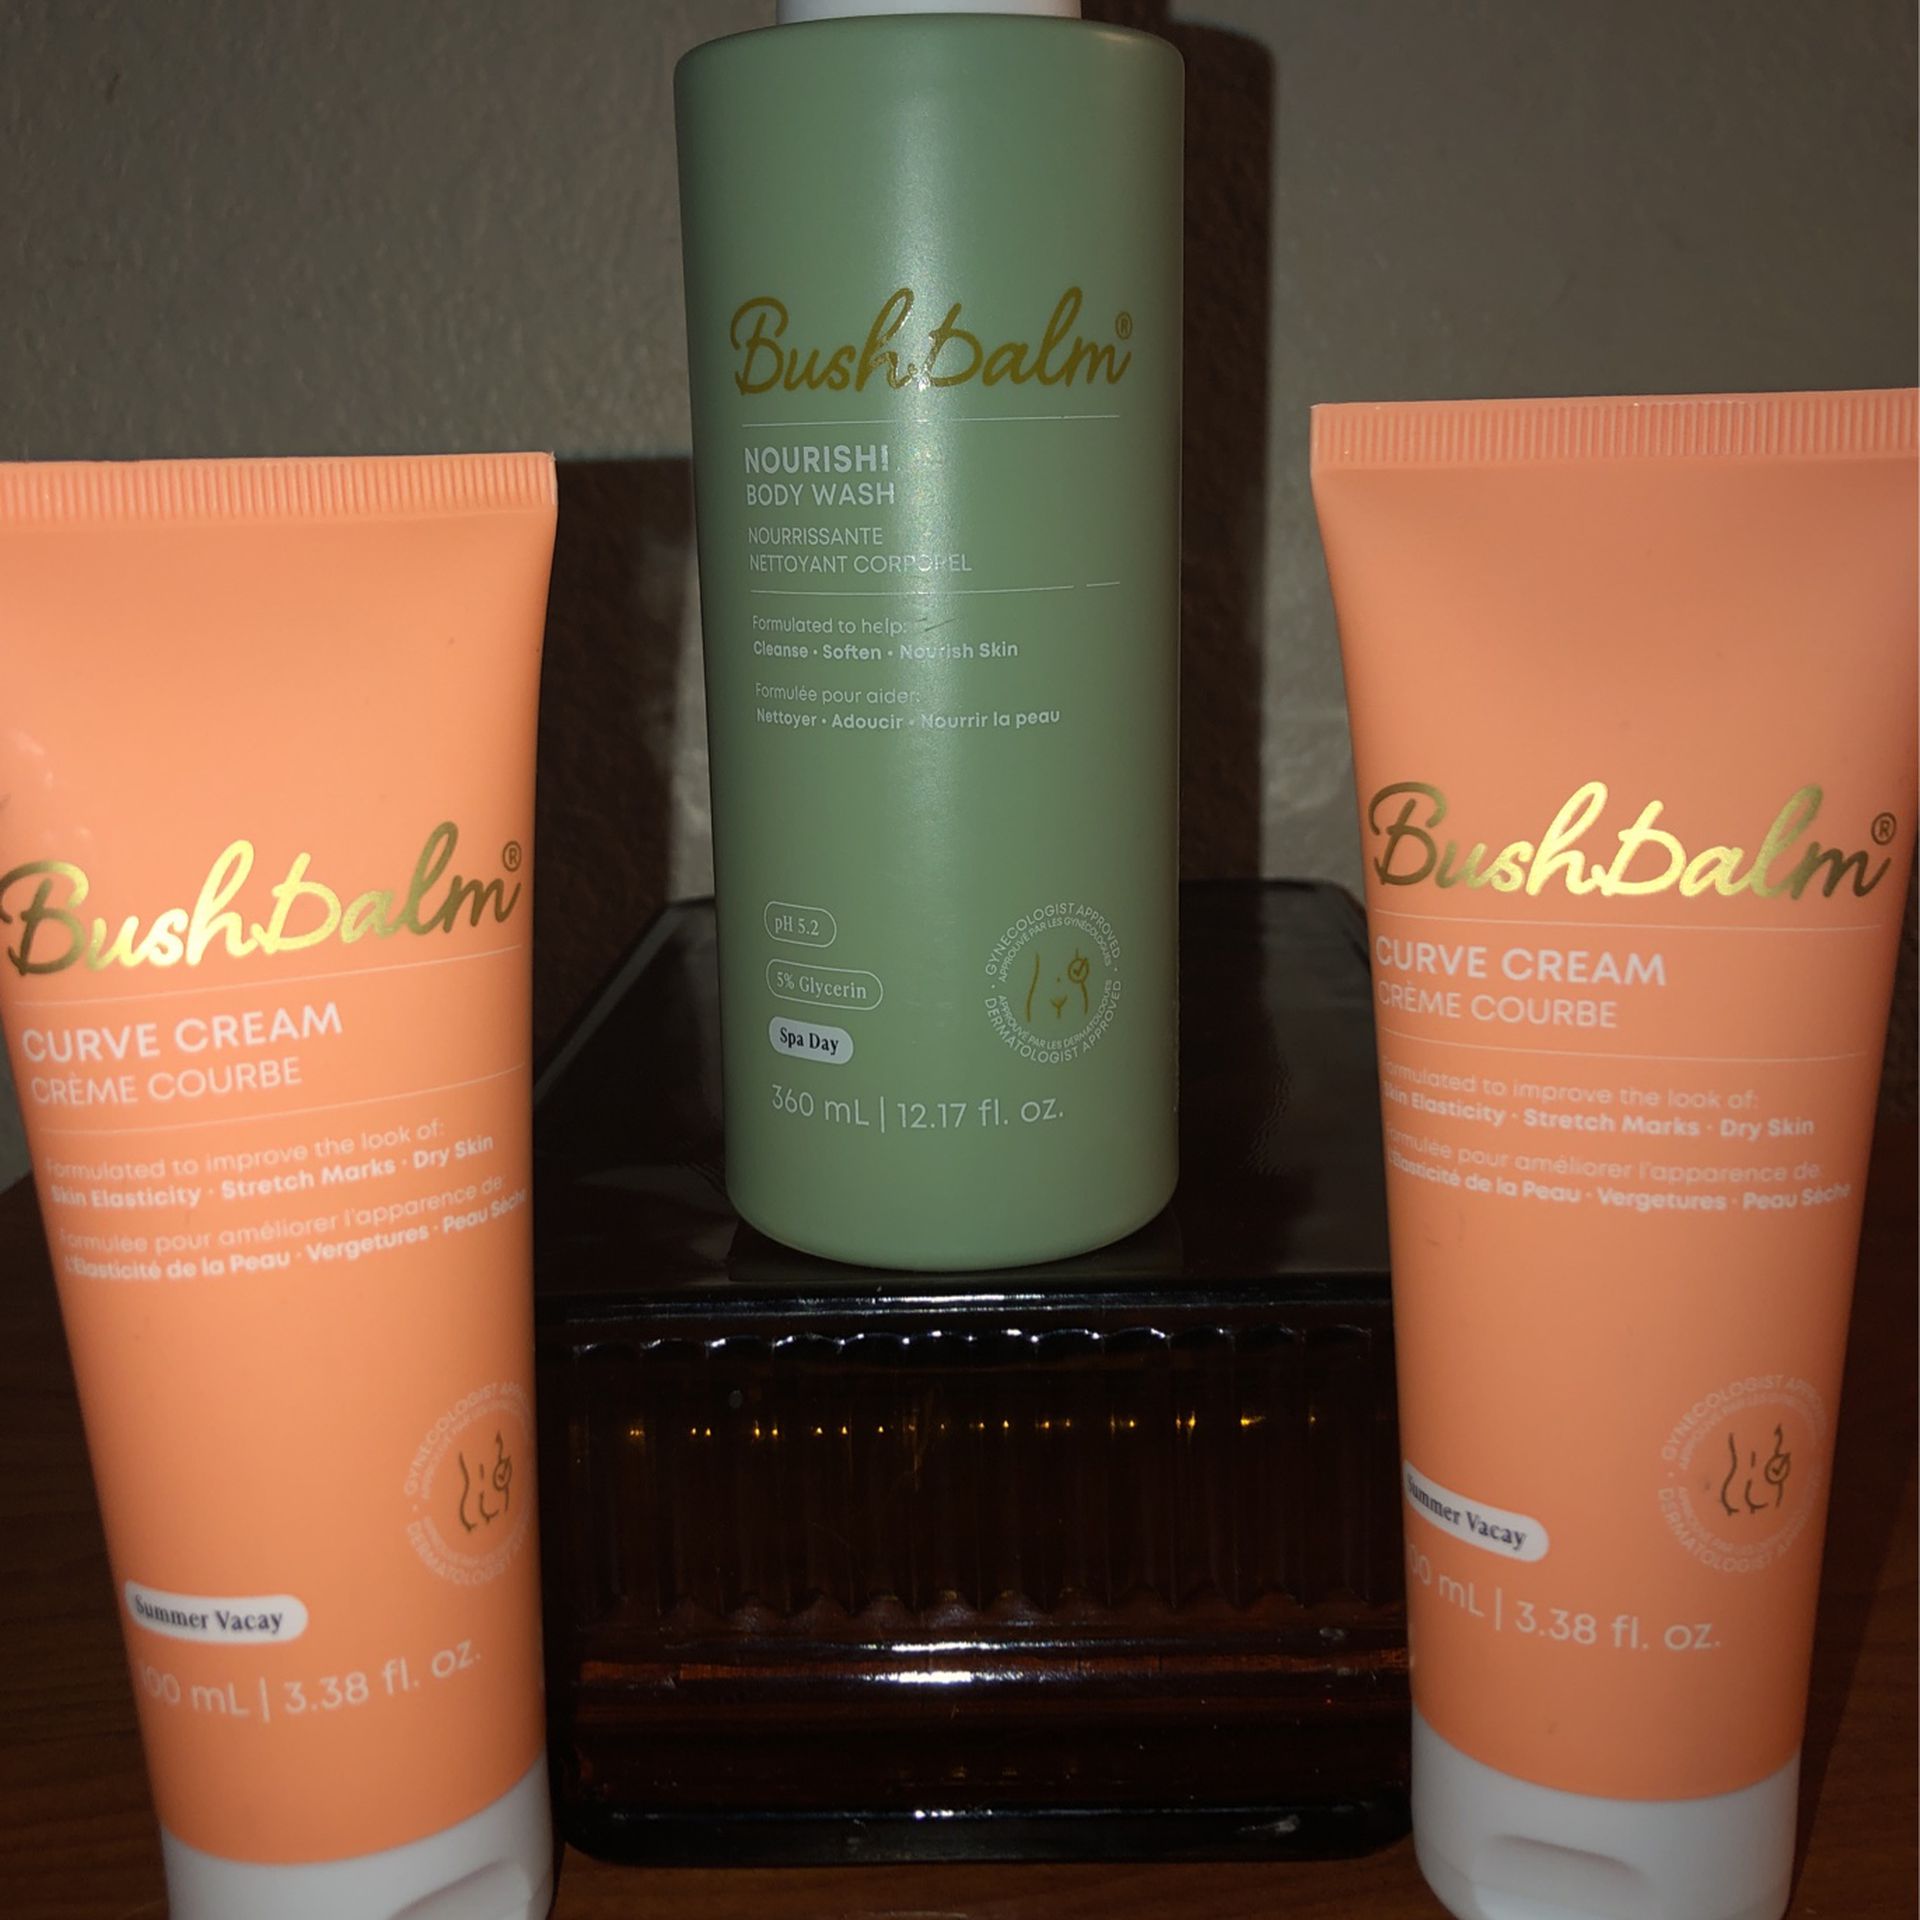 Brand NEW! 🚿    BushBalm - Skin / Body Care Products - Body Wash / Curve Cream (((PENDING PICK UP 5-6:30pm)))